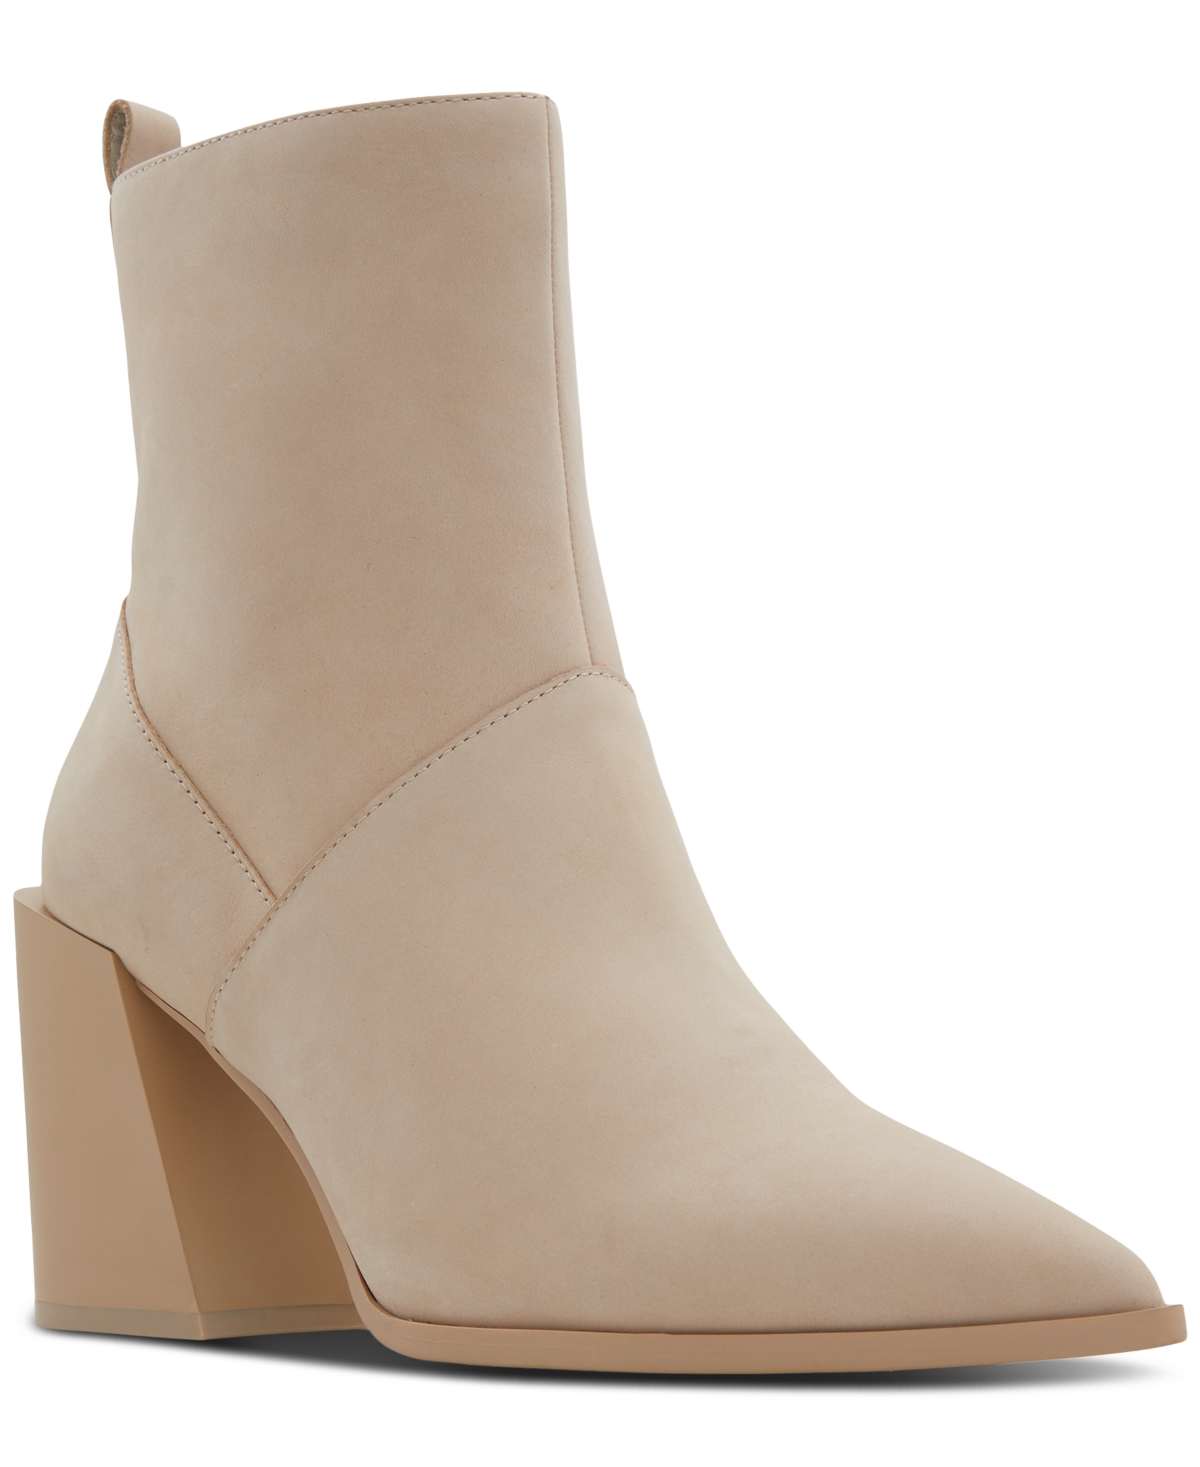 Women's Bethanny Pointed-Toe Dress Boots - Beige Leather